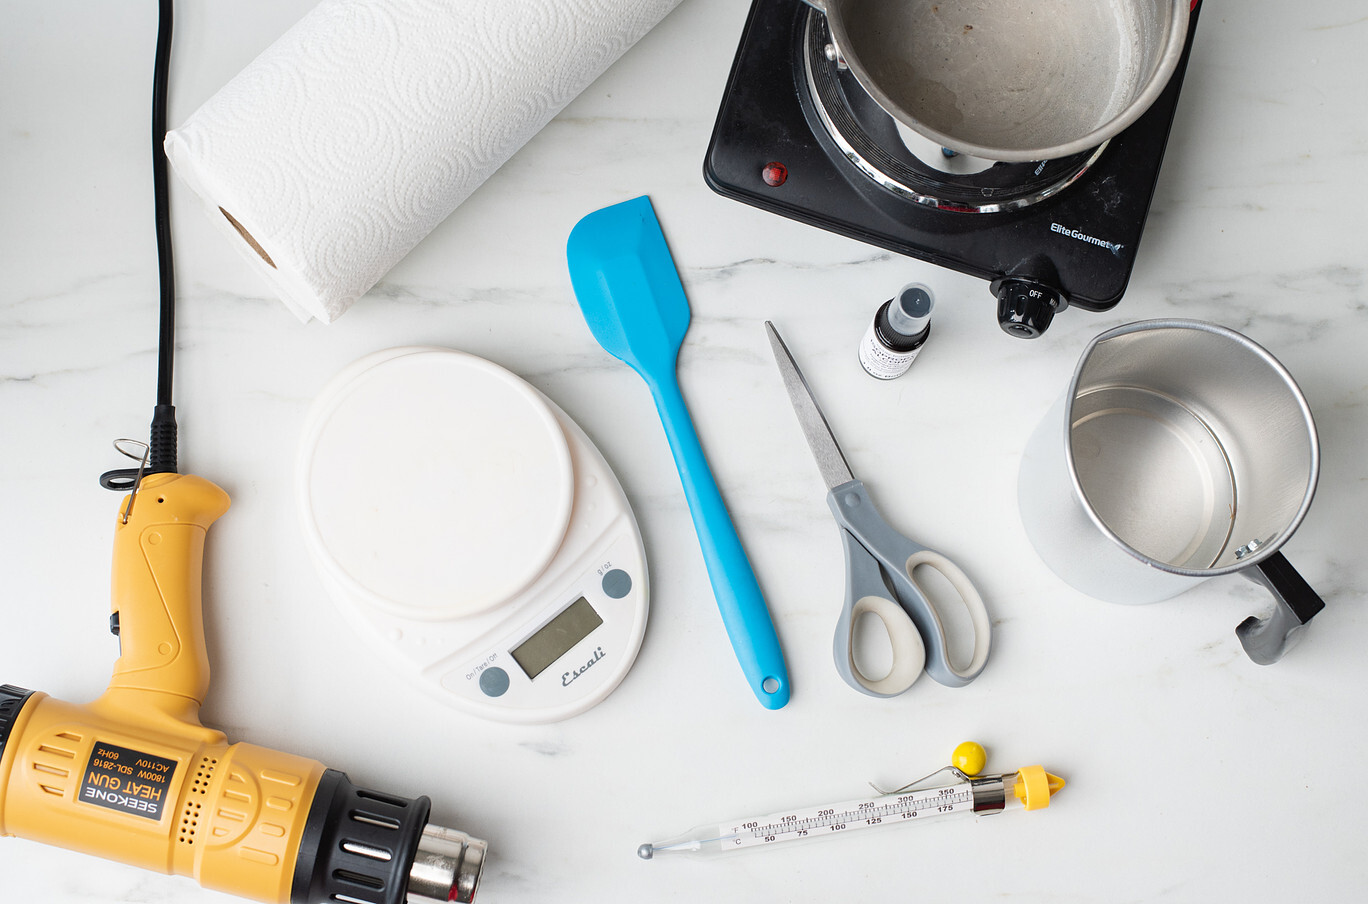 An overhead view of candle making equipment, including a yellow heat gun, glass candy thermometer, digital scale, silicone spatula, scissors, a roll of paper towels, a spritz bottle of isopropyl alcohol, a metal pouring pitchers, and a hot plate.